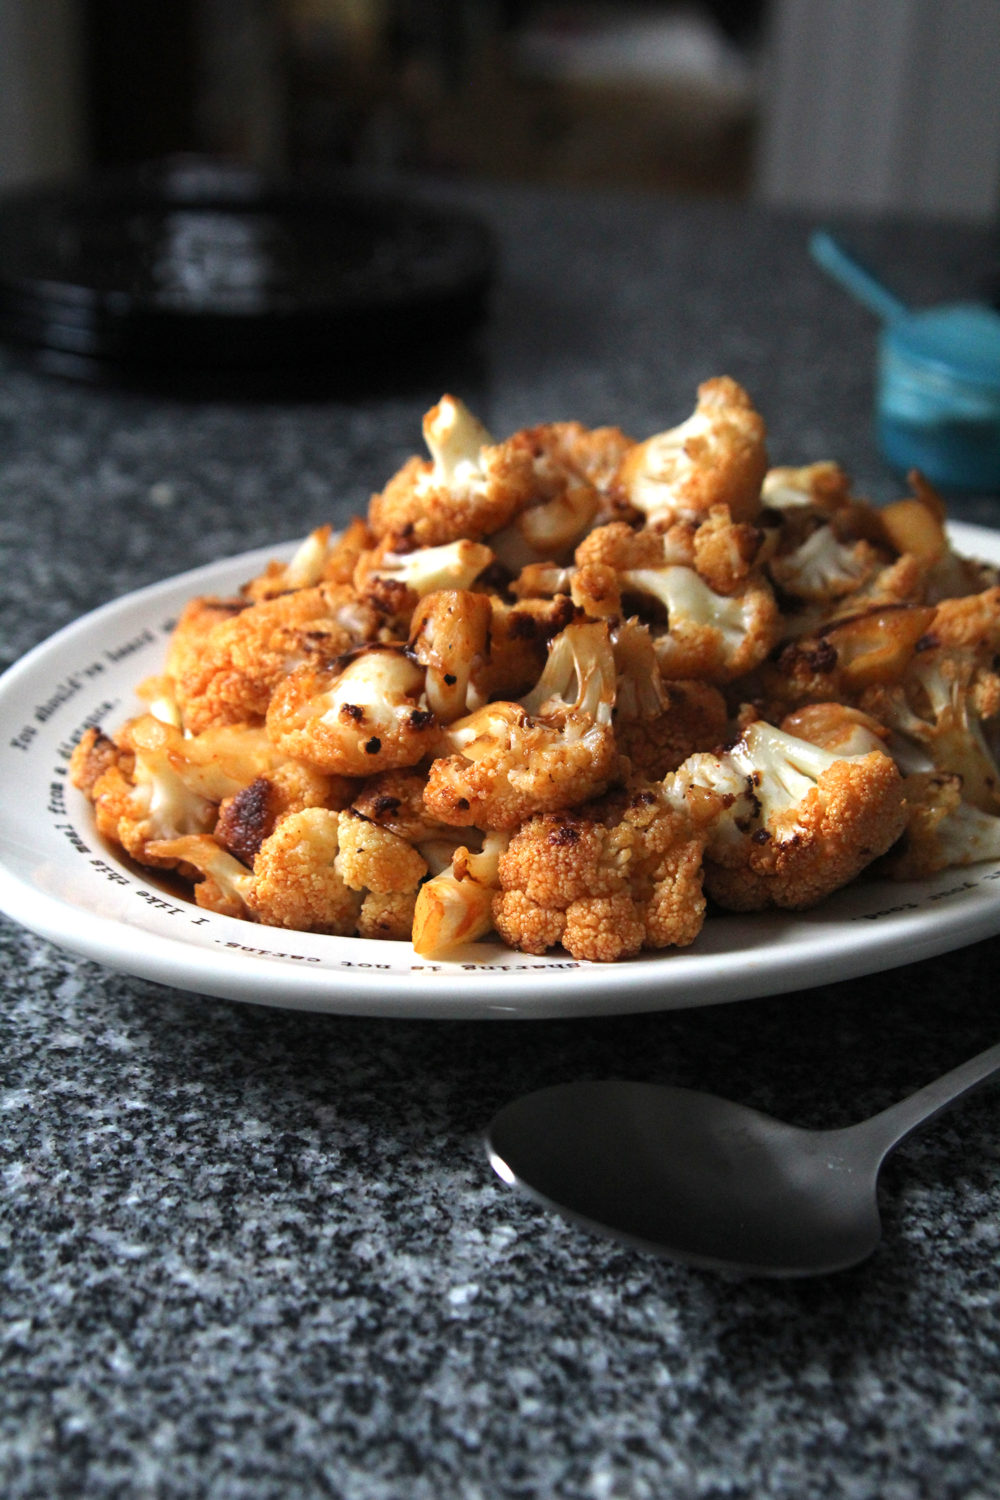 Spicy Roasted Cauliflower with Gochujang